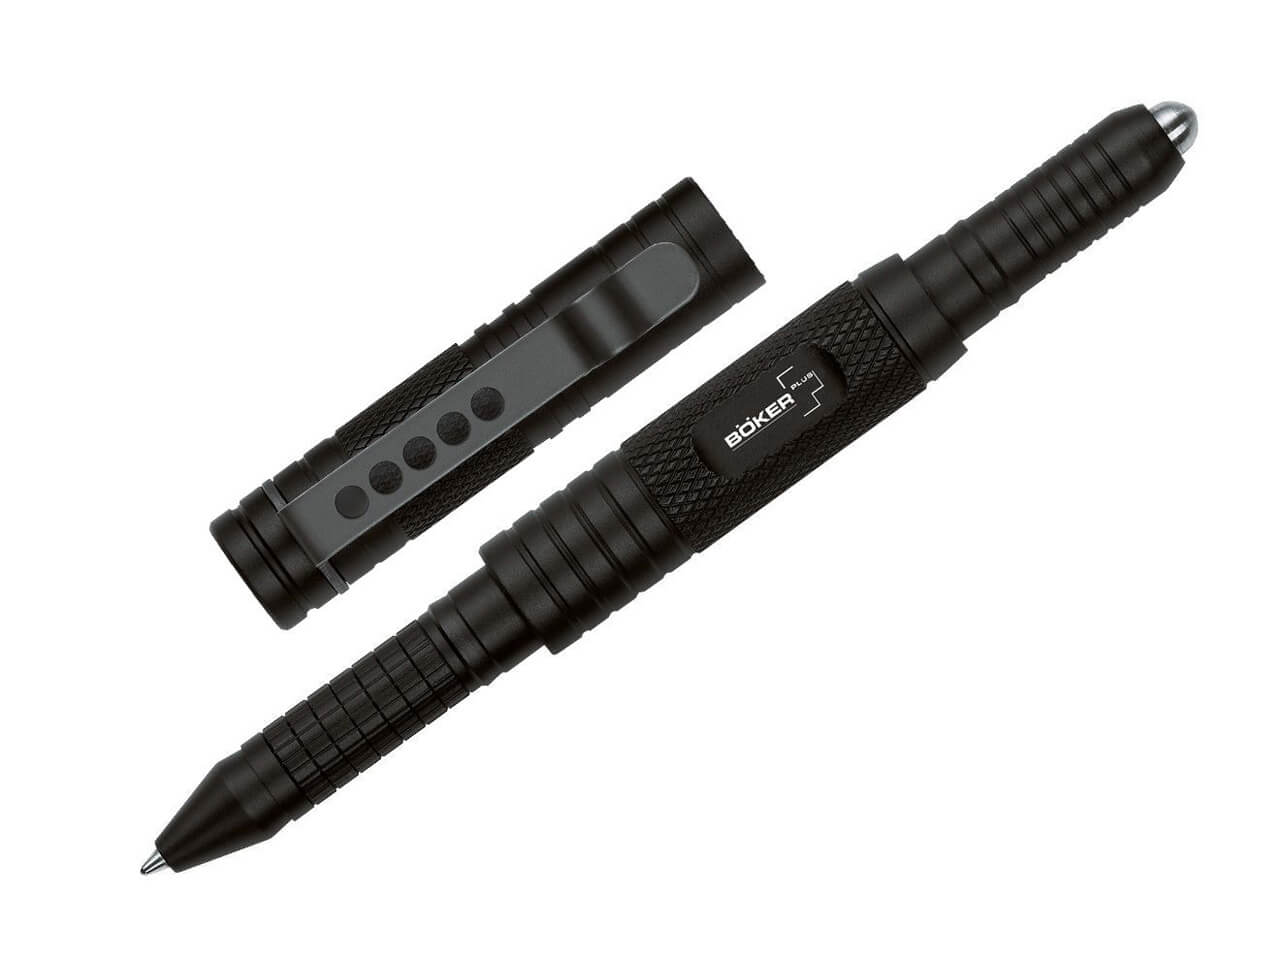 How Do You Choose The Best Tactical Pen